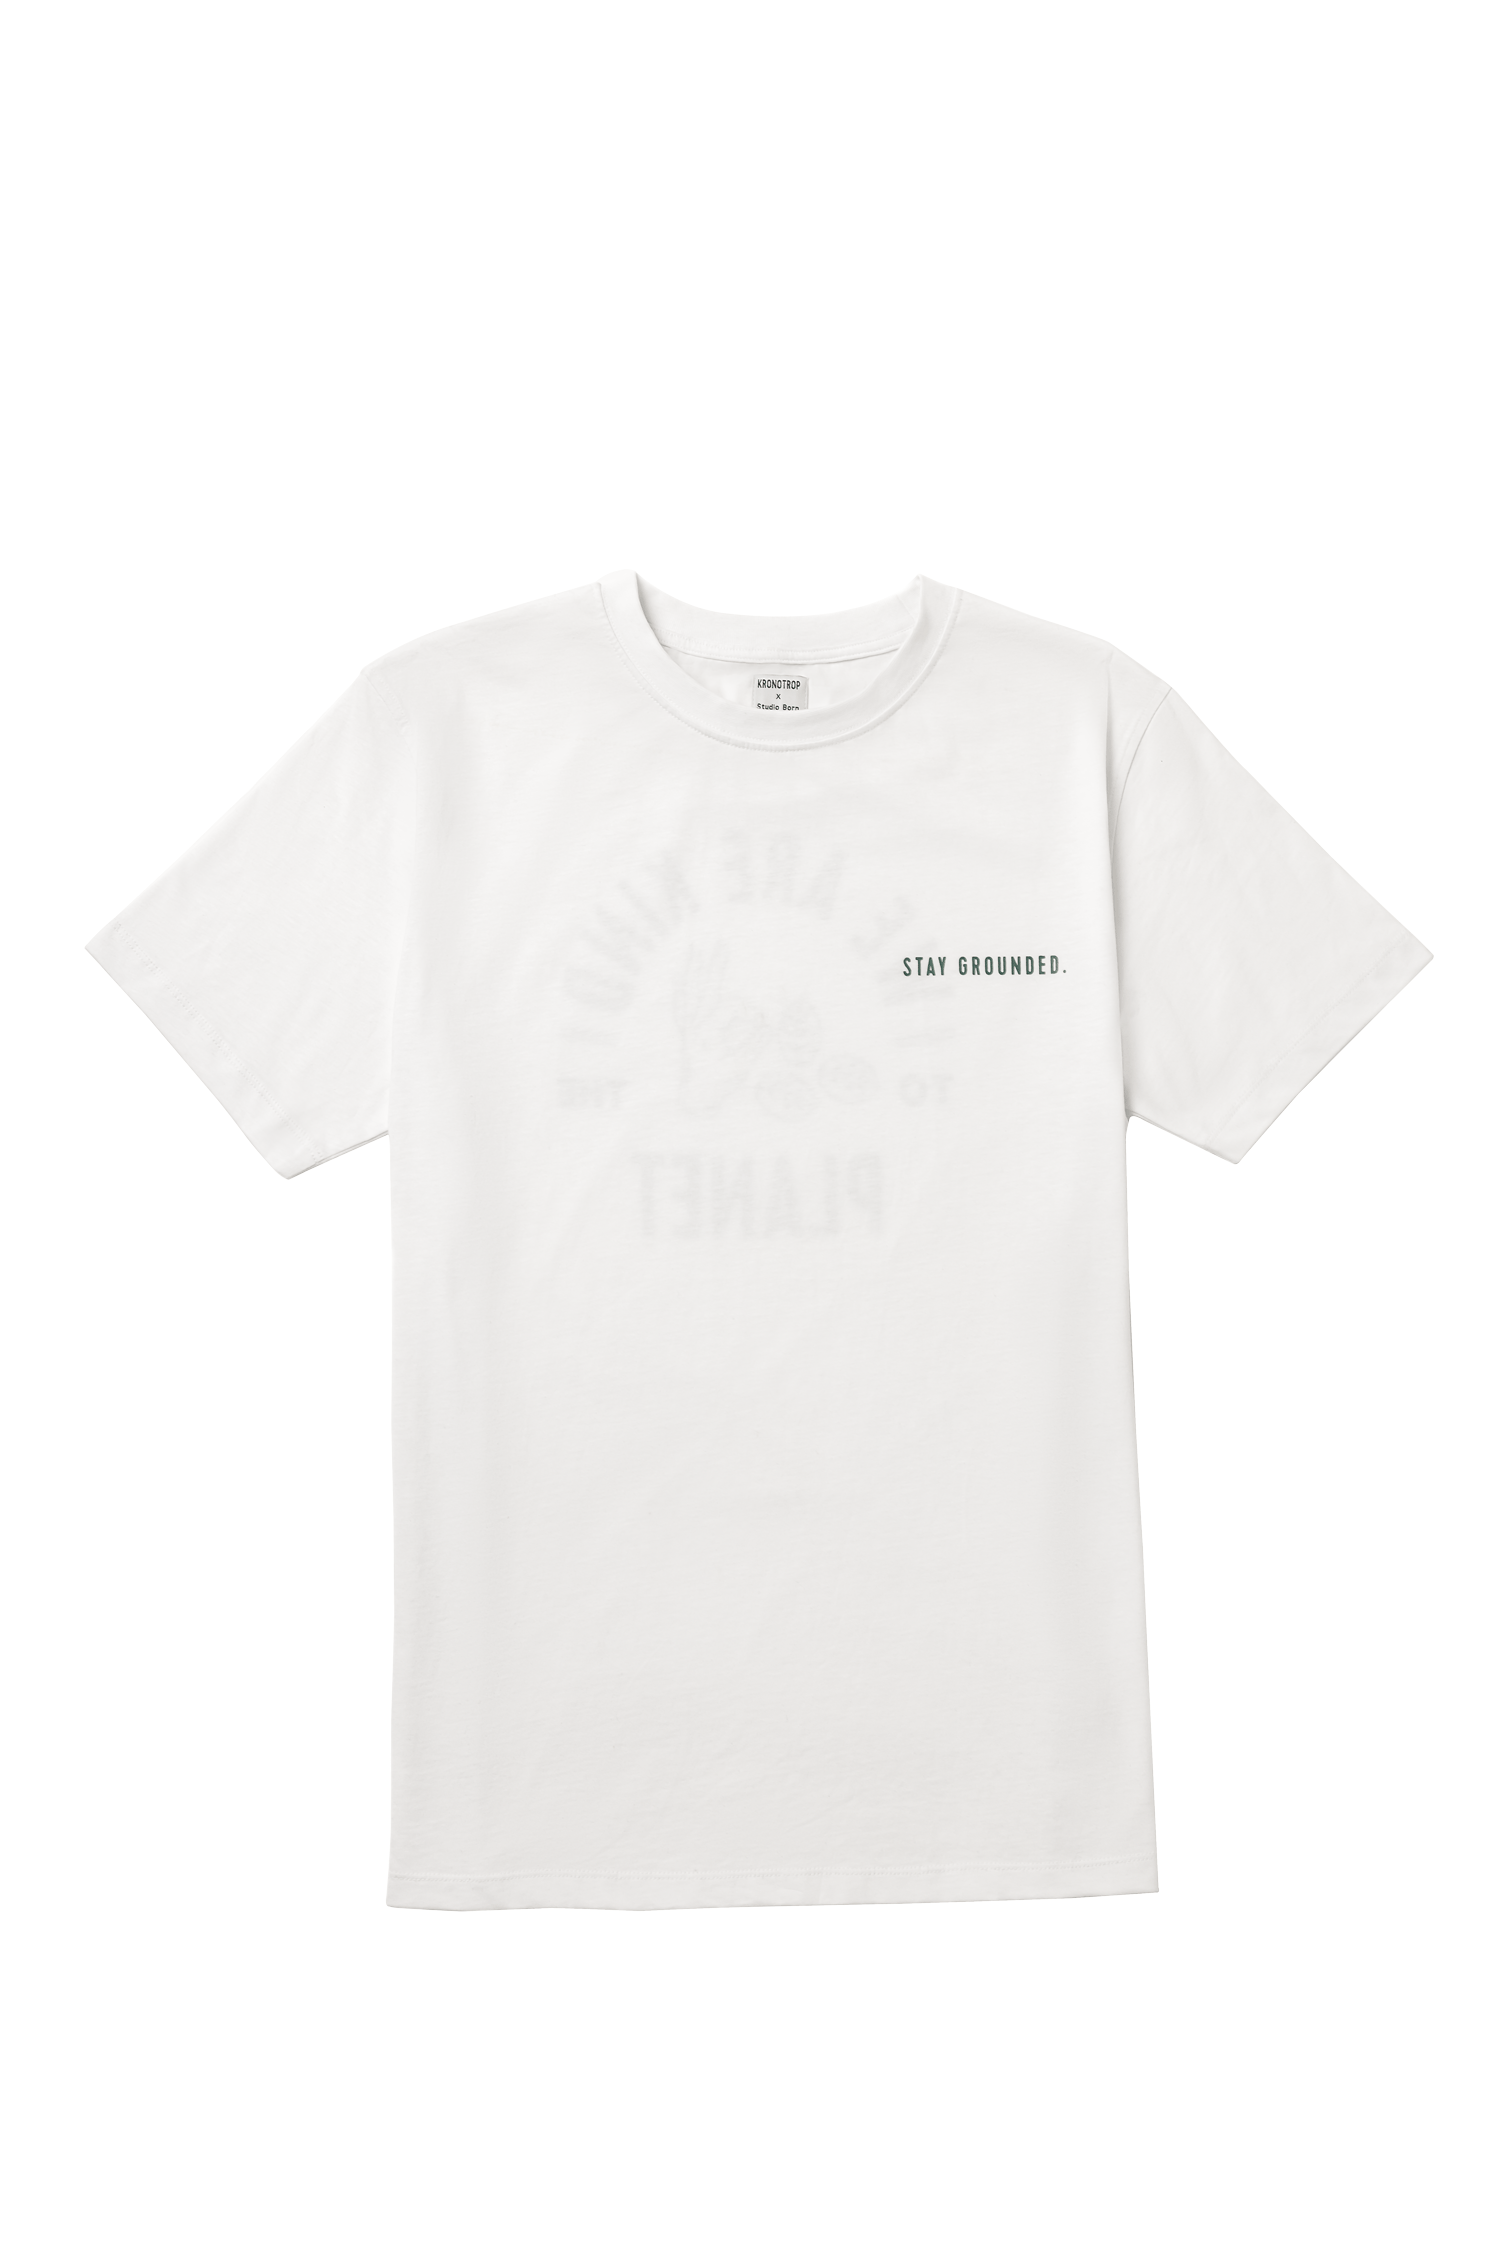 Grounded Collection Oversized White T-Shirt